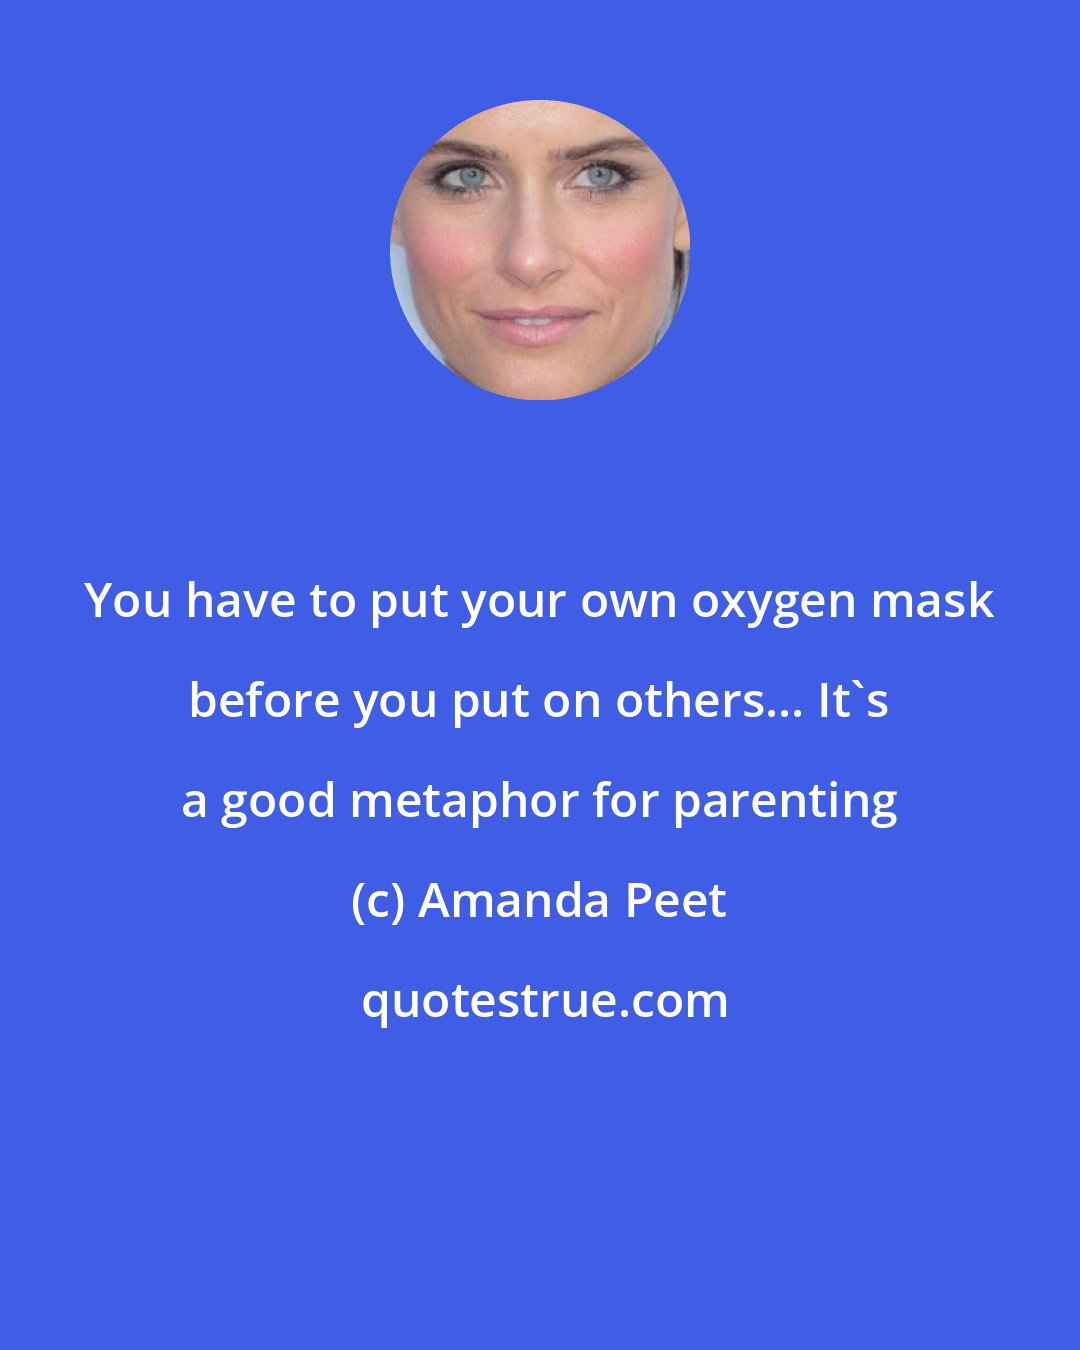 Amanda Peet: You have to put your own oxygen mask before you put on others... It's a good metaphor for parenting